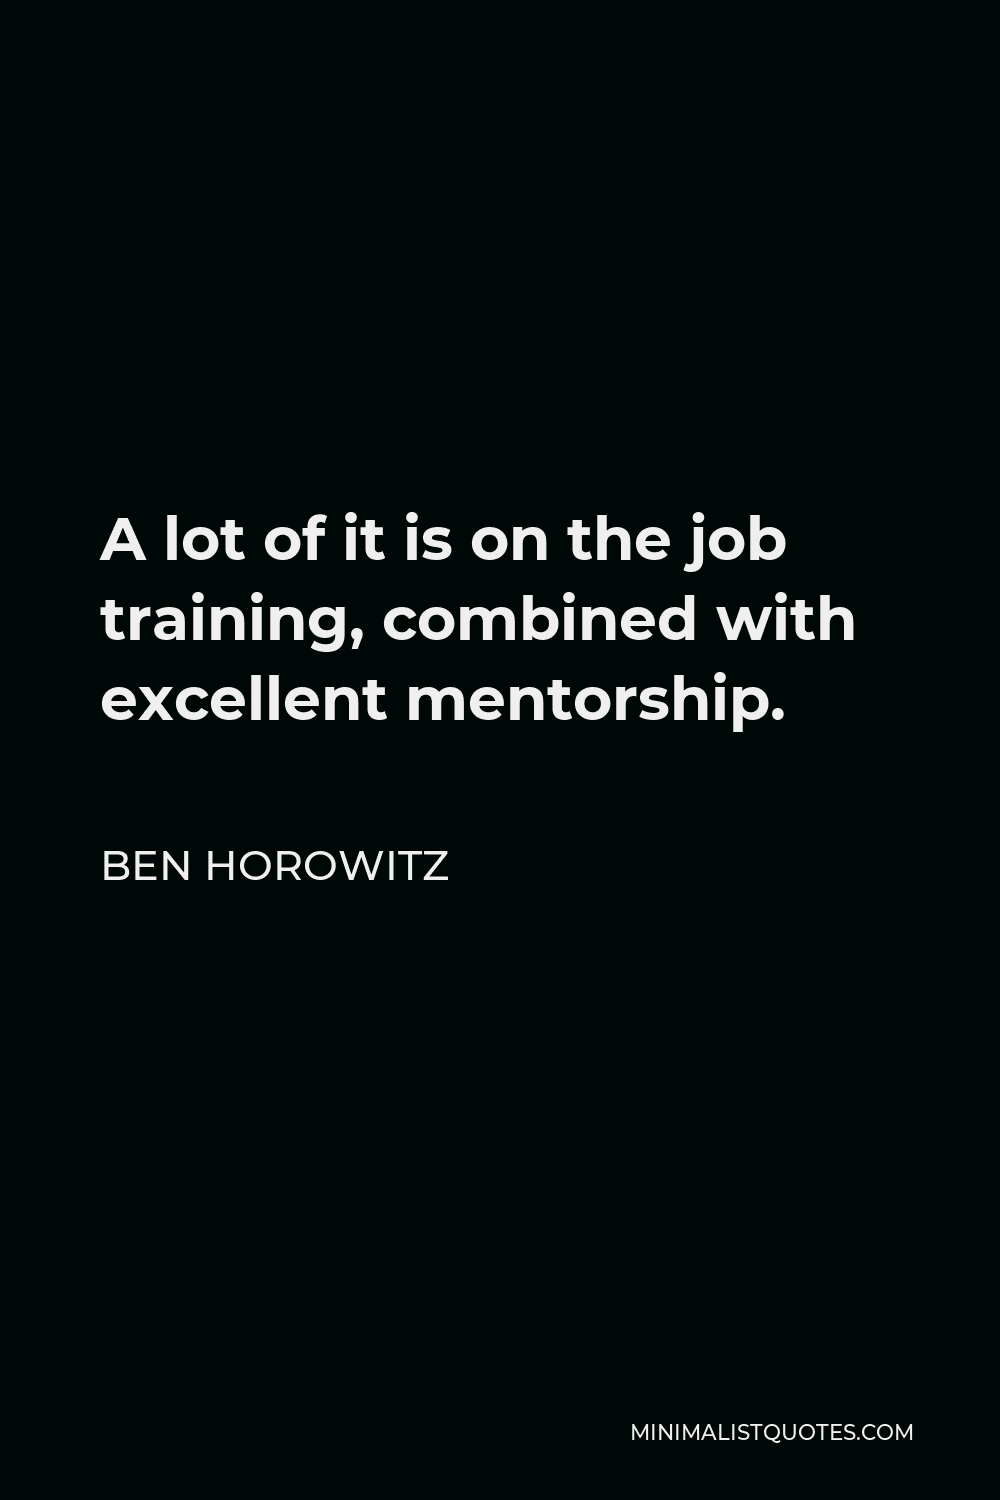 Ben Horowitz Quote - A lot of it is on the job training, combined with excellent mentorship.